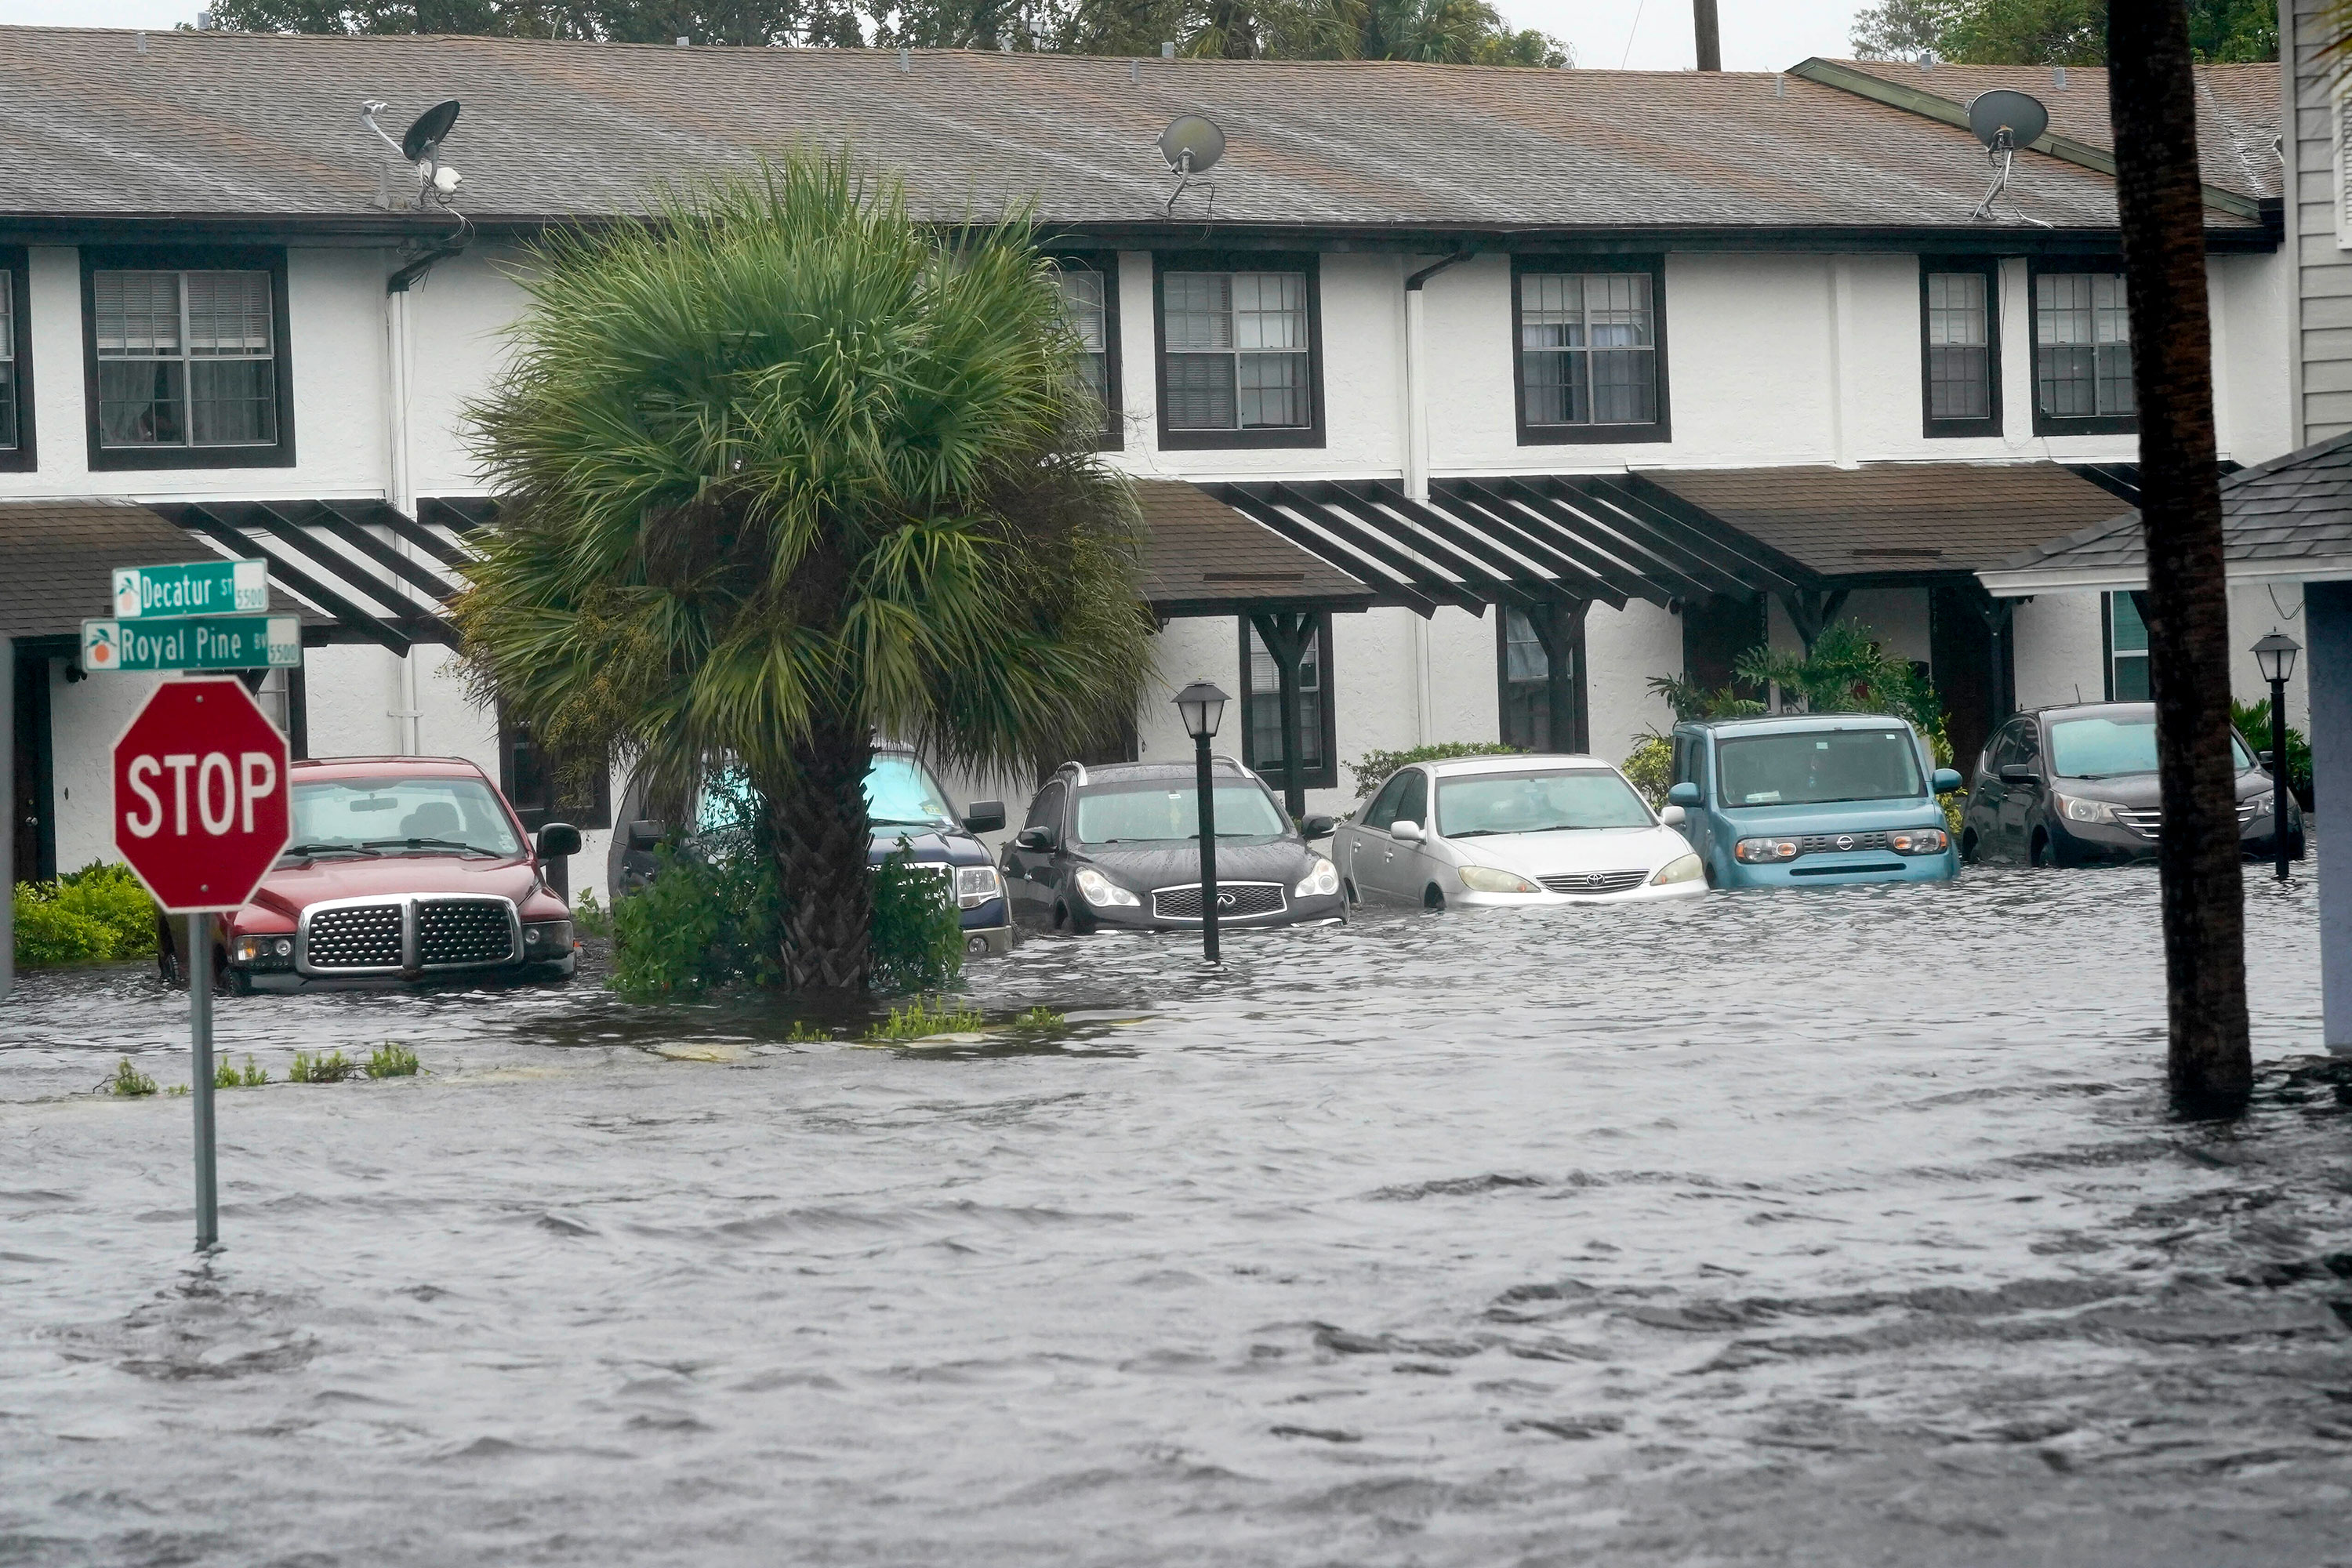 Vehicles sit in floodwaters at the Palm Isle apartments in Orlando, Florida, on Thursday.